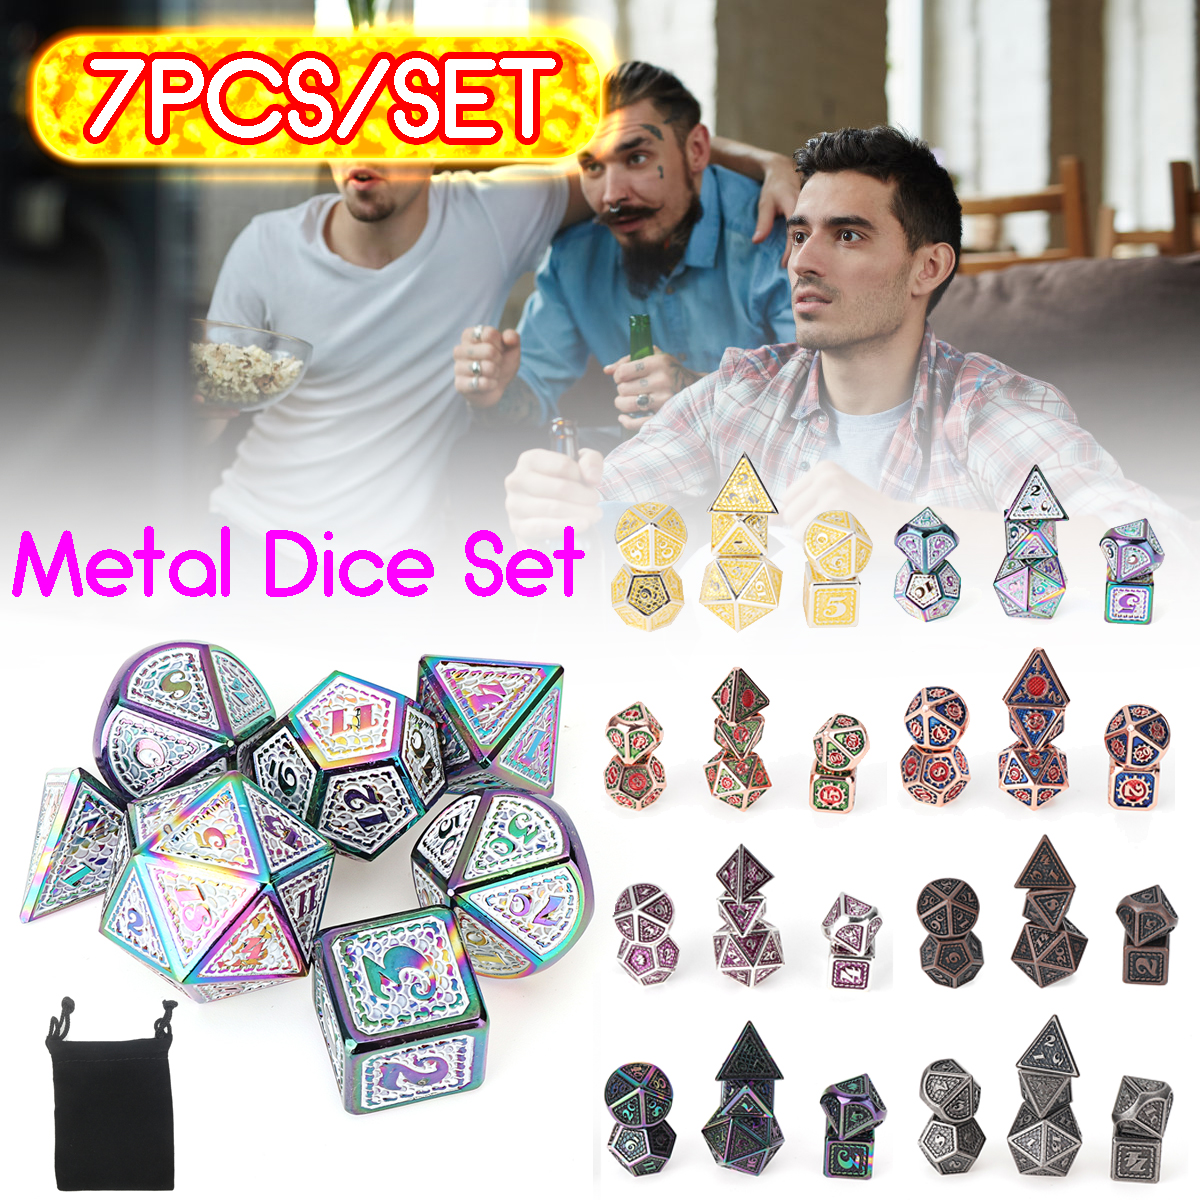 Beutiful-Color-Metal-Polyhedral-Dice-Multi-side-Dice-Set-For-DND-RPG-MTG-Role-Playing-Board-Game-Wit-1716609-1